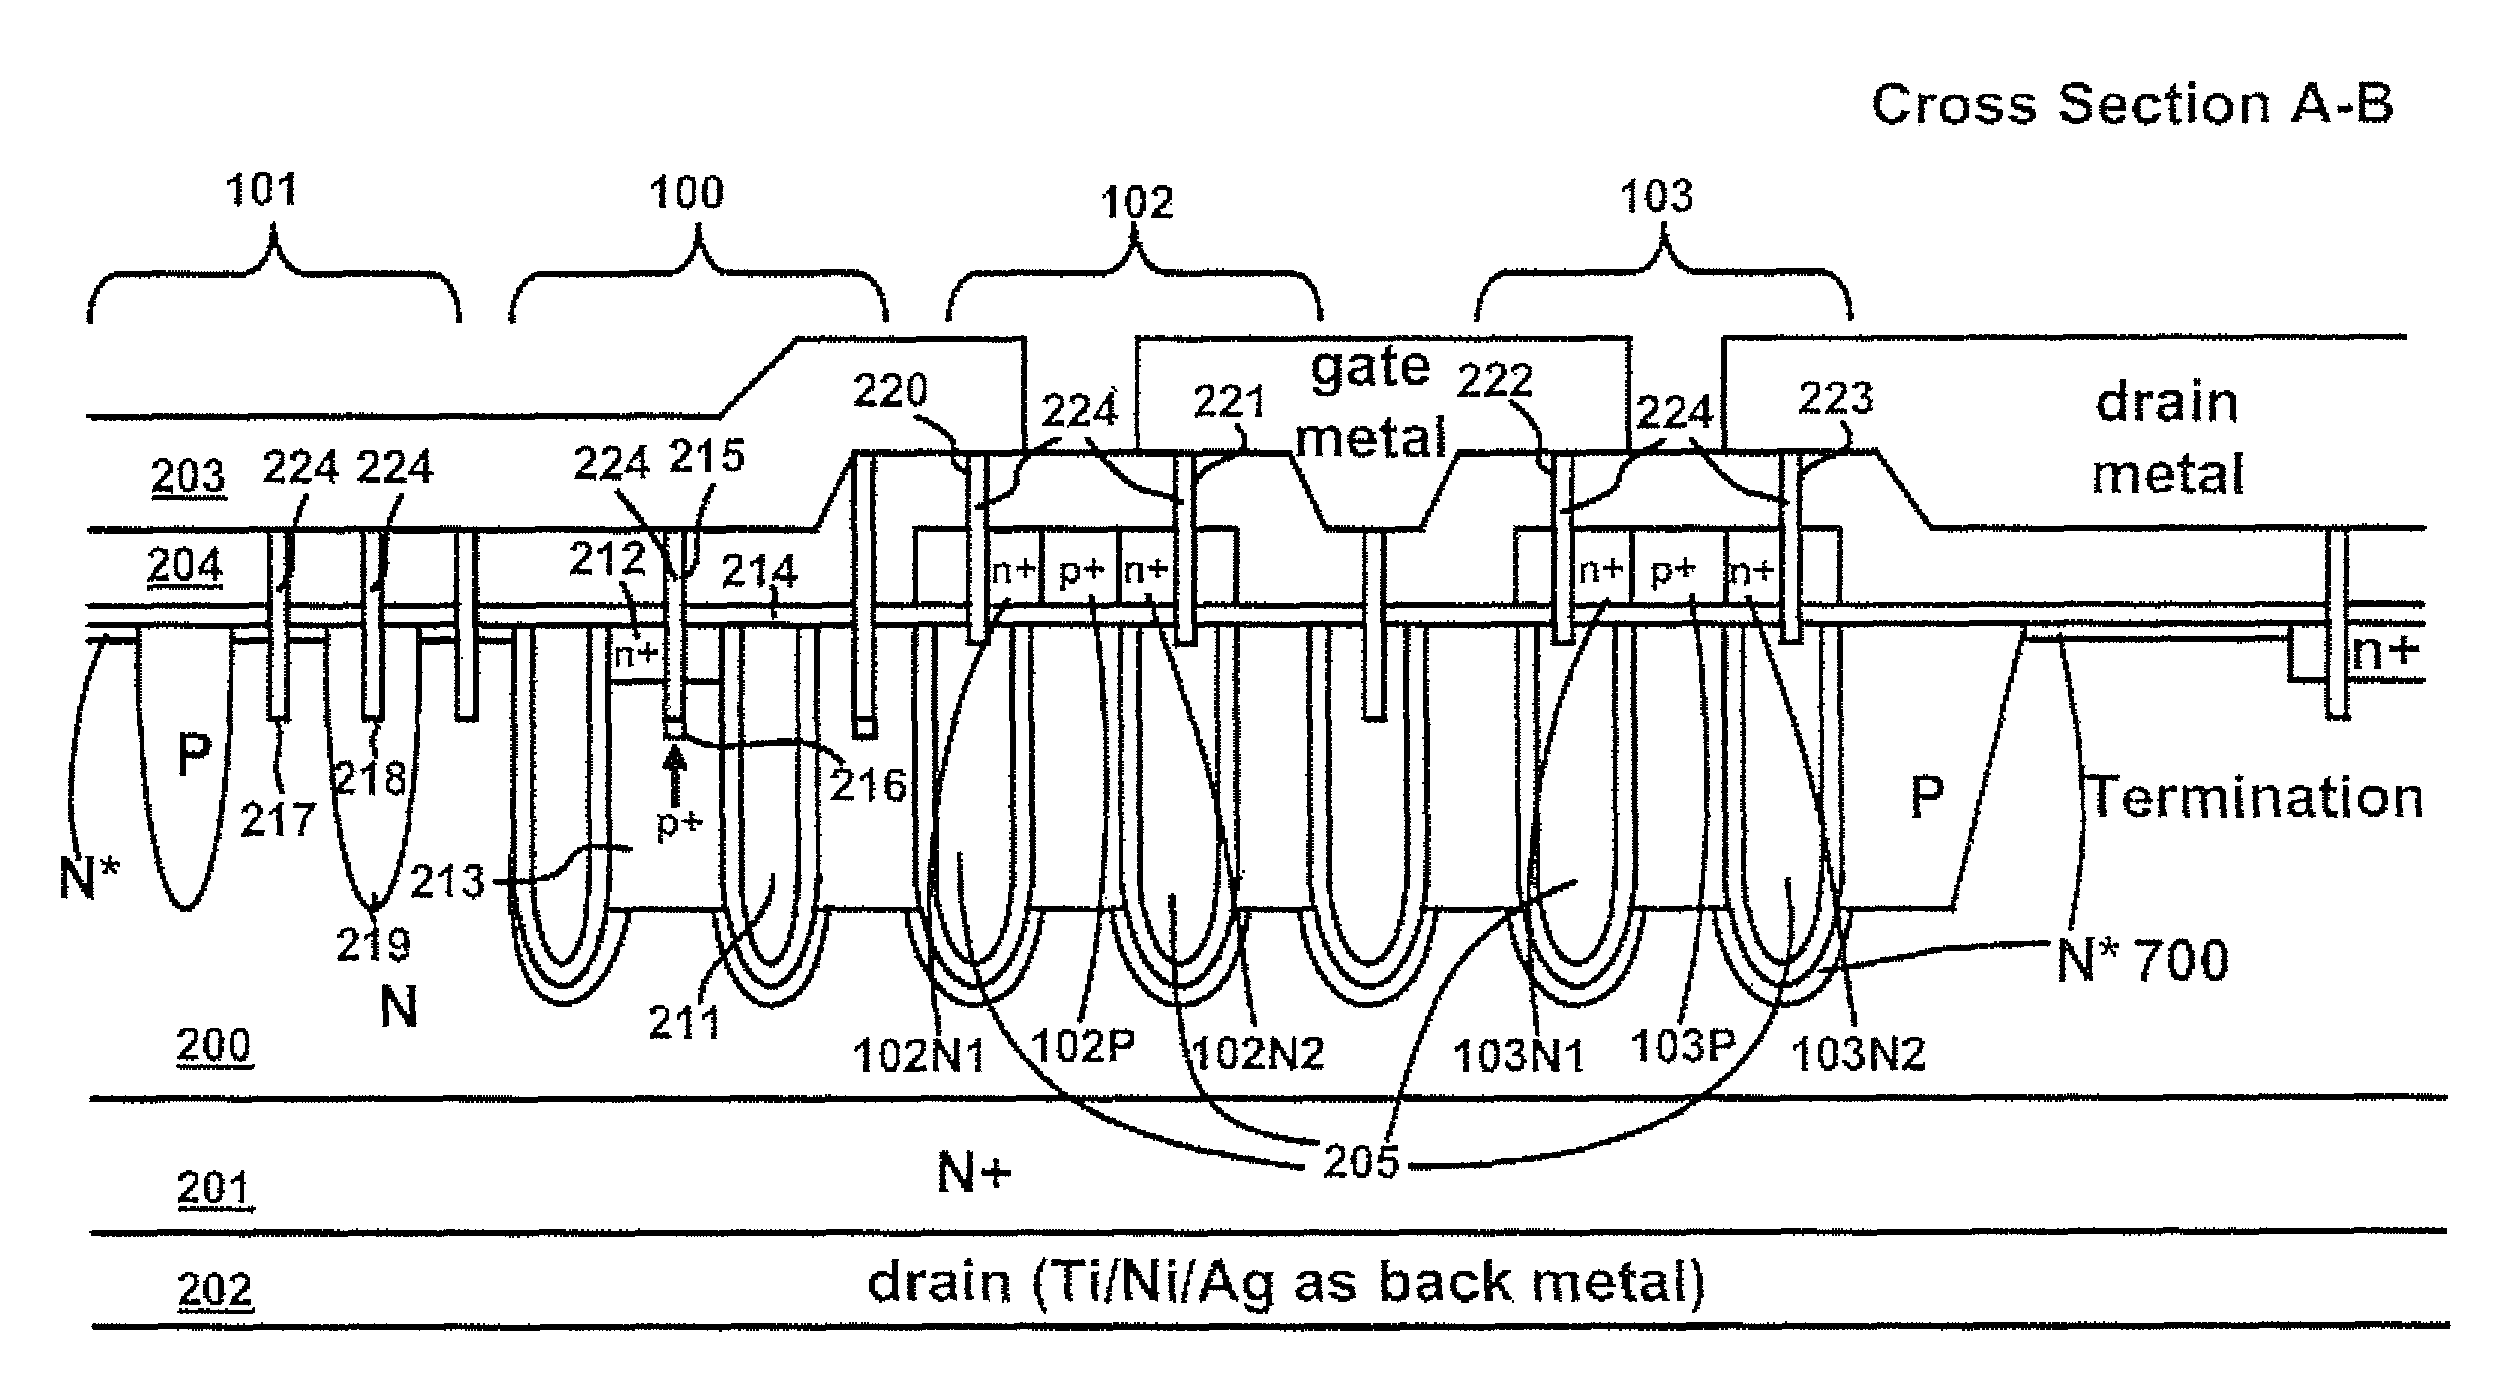 MSD integrated circuits with shallow trench